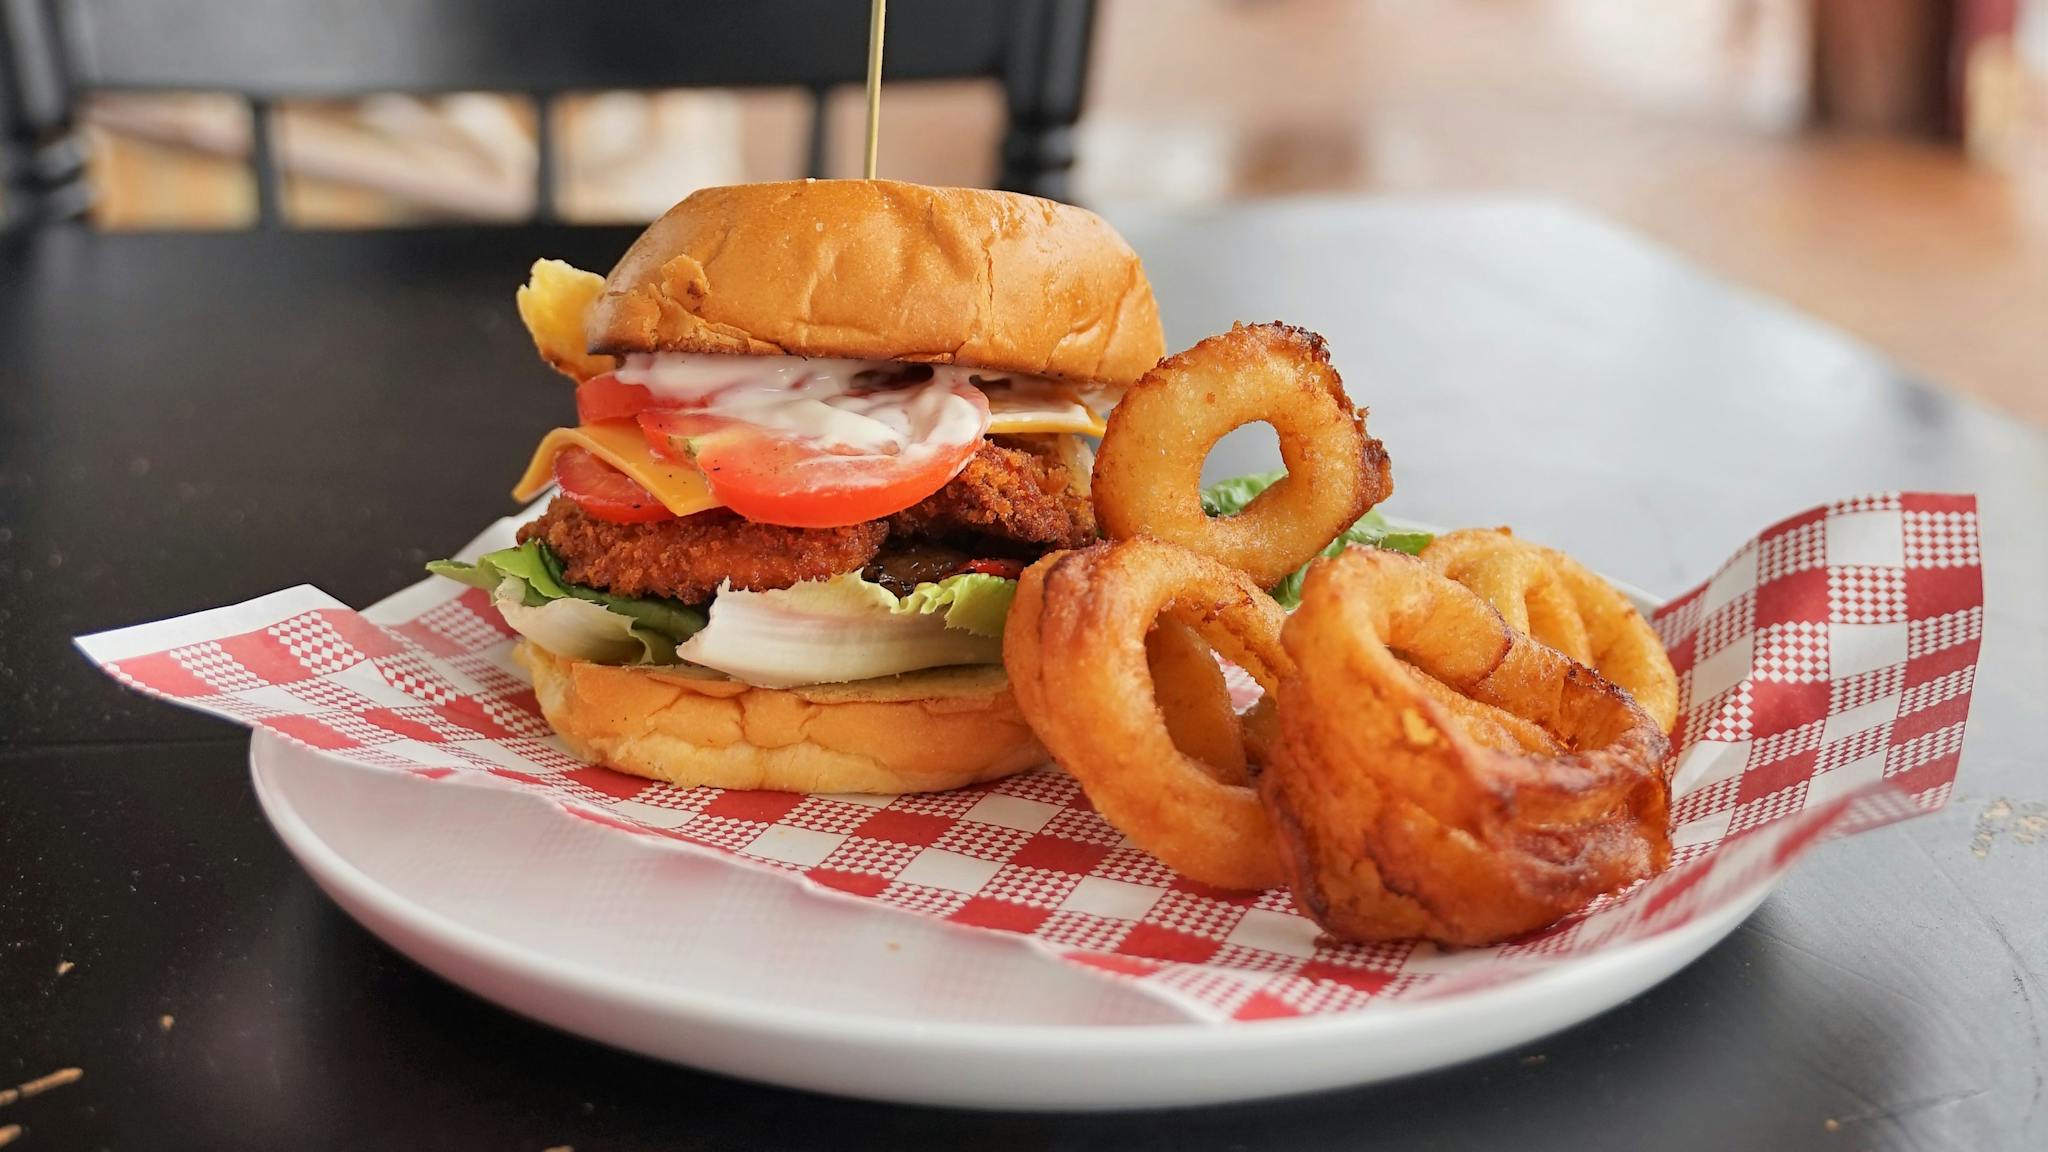 Beef burger with Onion rings, The Retro Diner